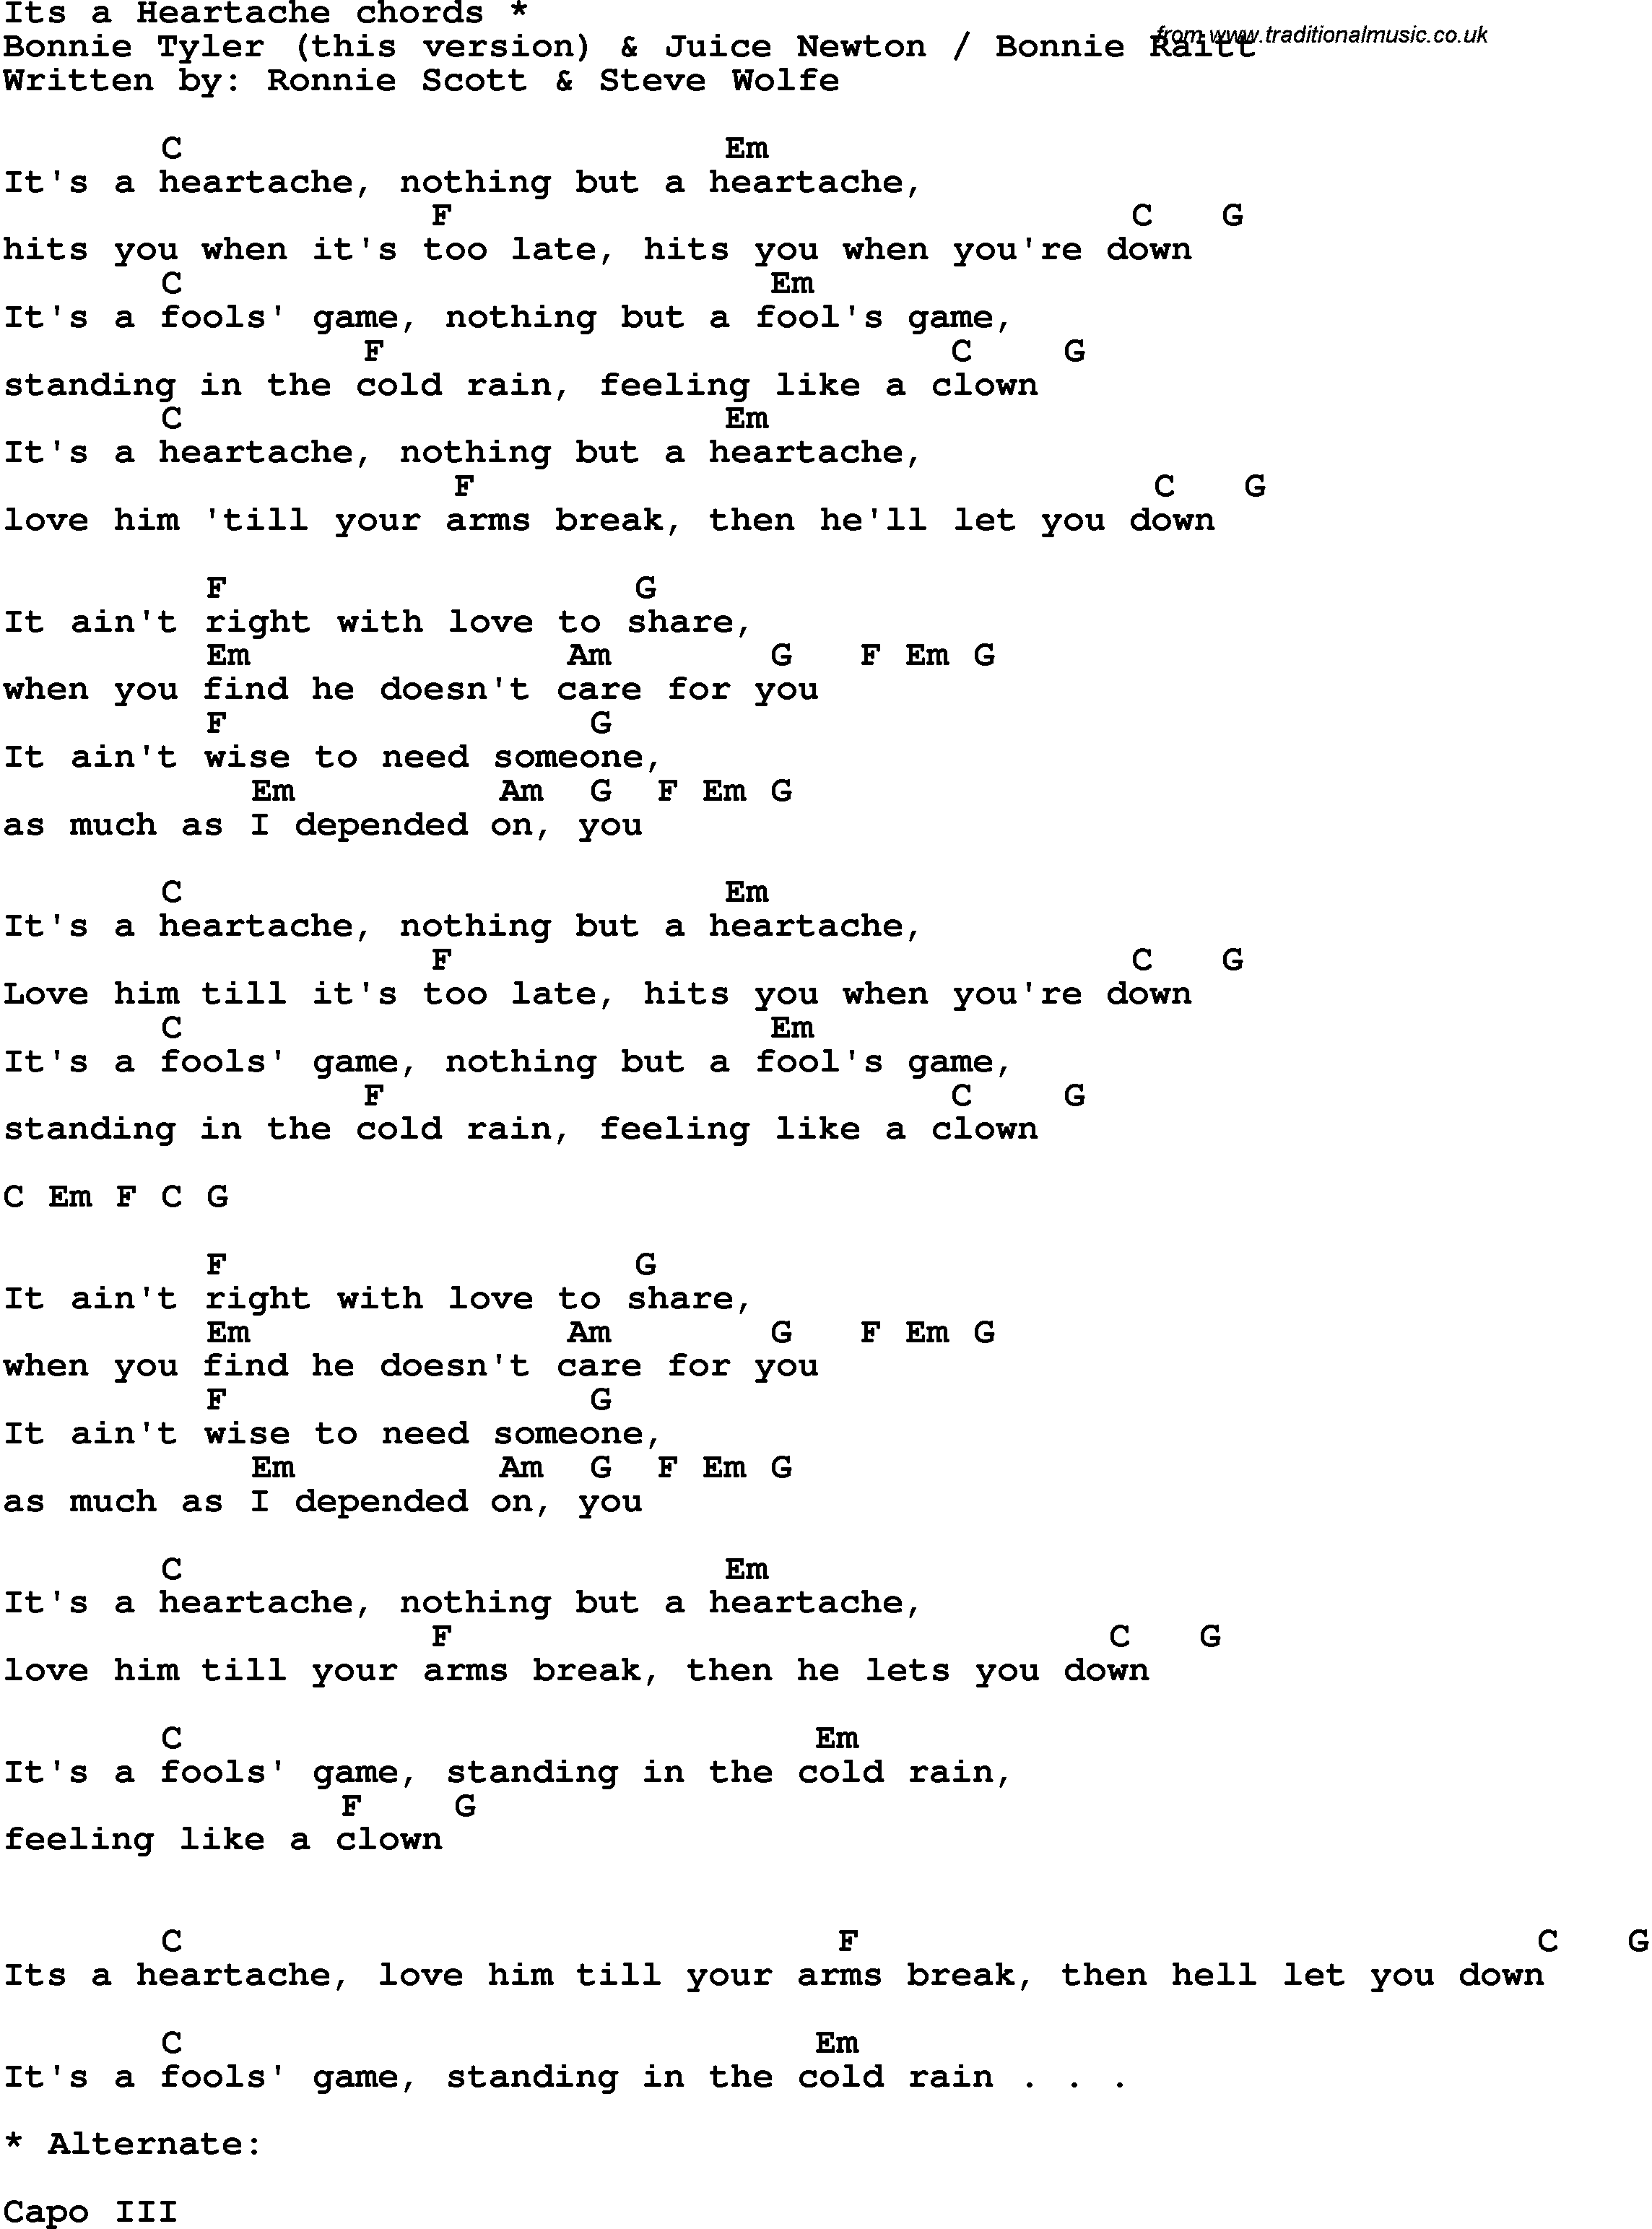 Song Lyrics with guitar chords for It's A Heartache